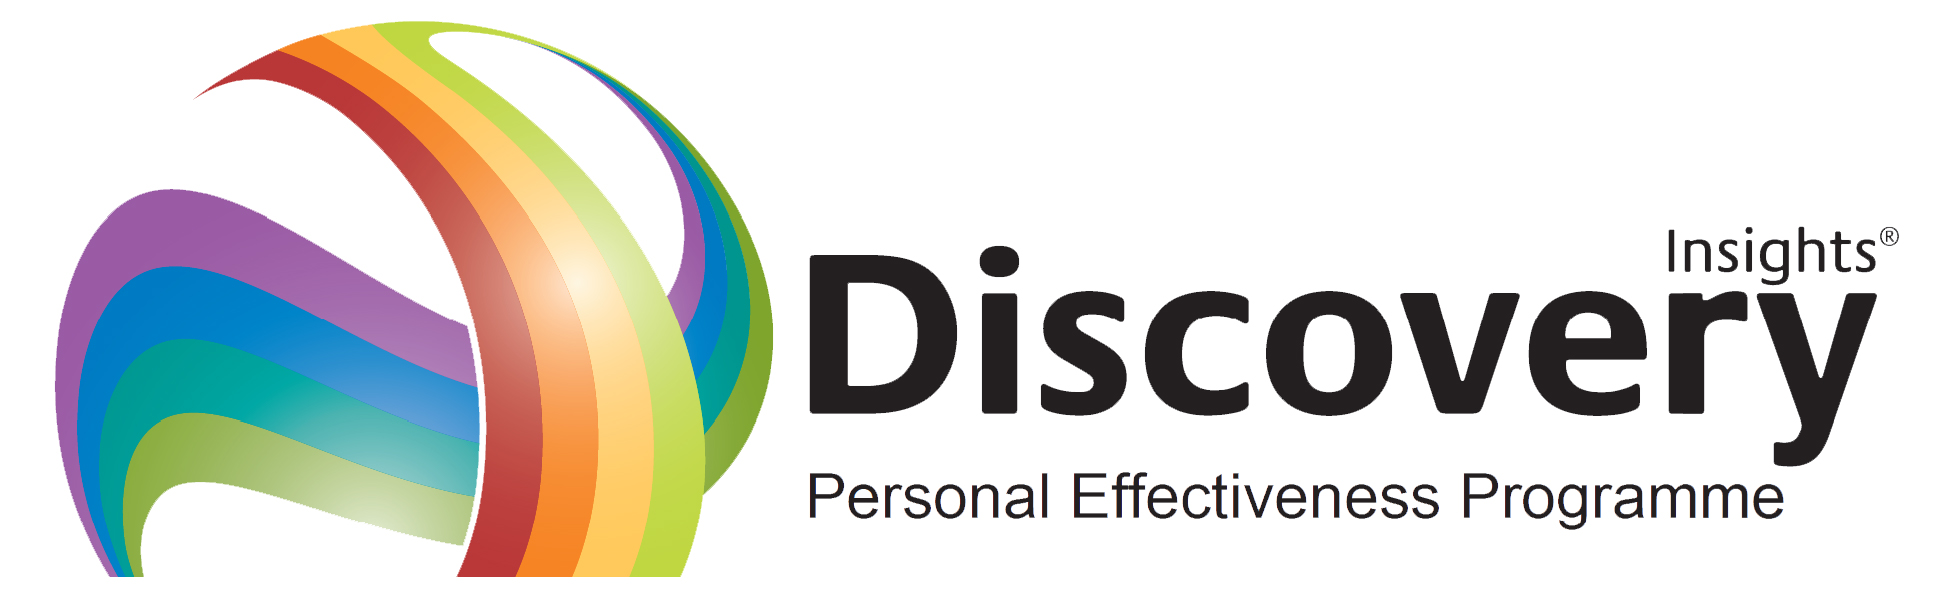 Discovery Insights Personal Effectiveness Programme